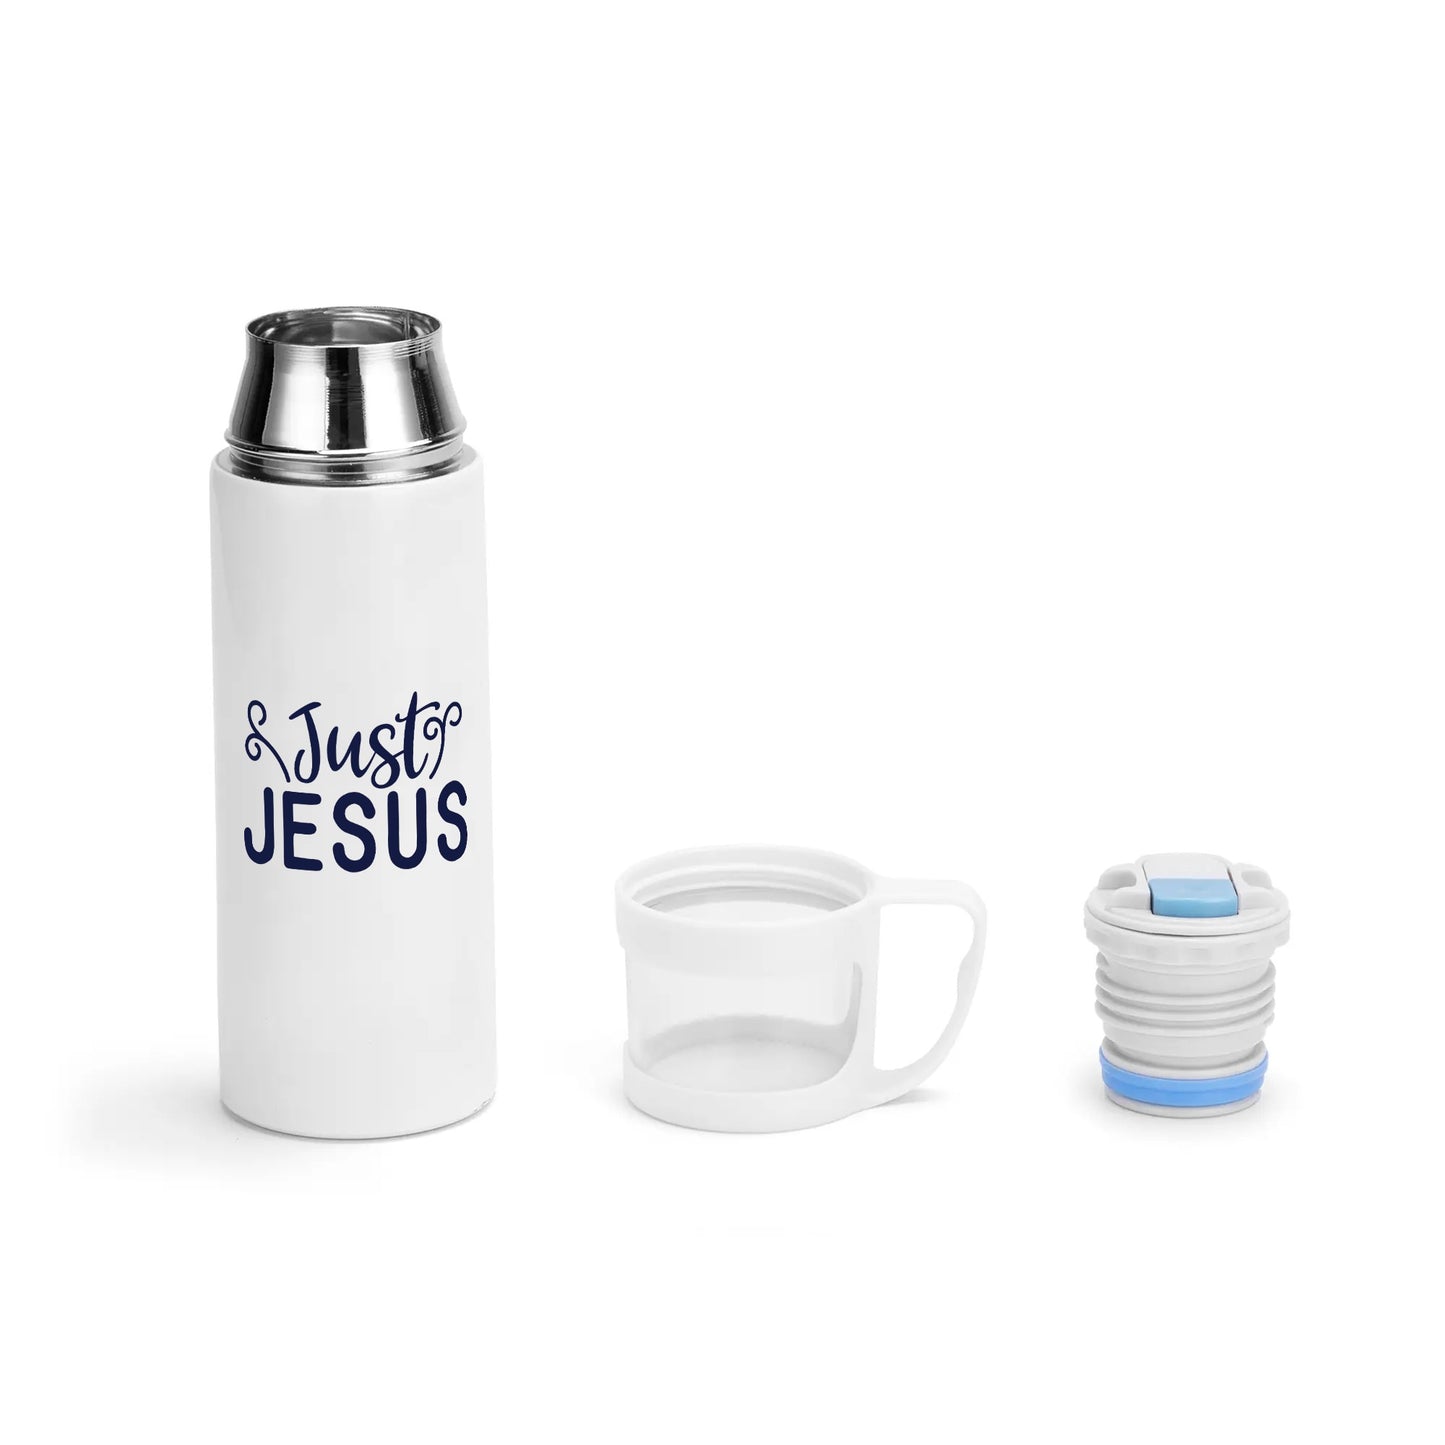 Just Jesus Christian Vacuum Bottle with Cup popcustoms